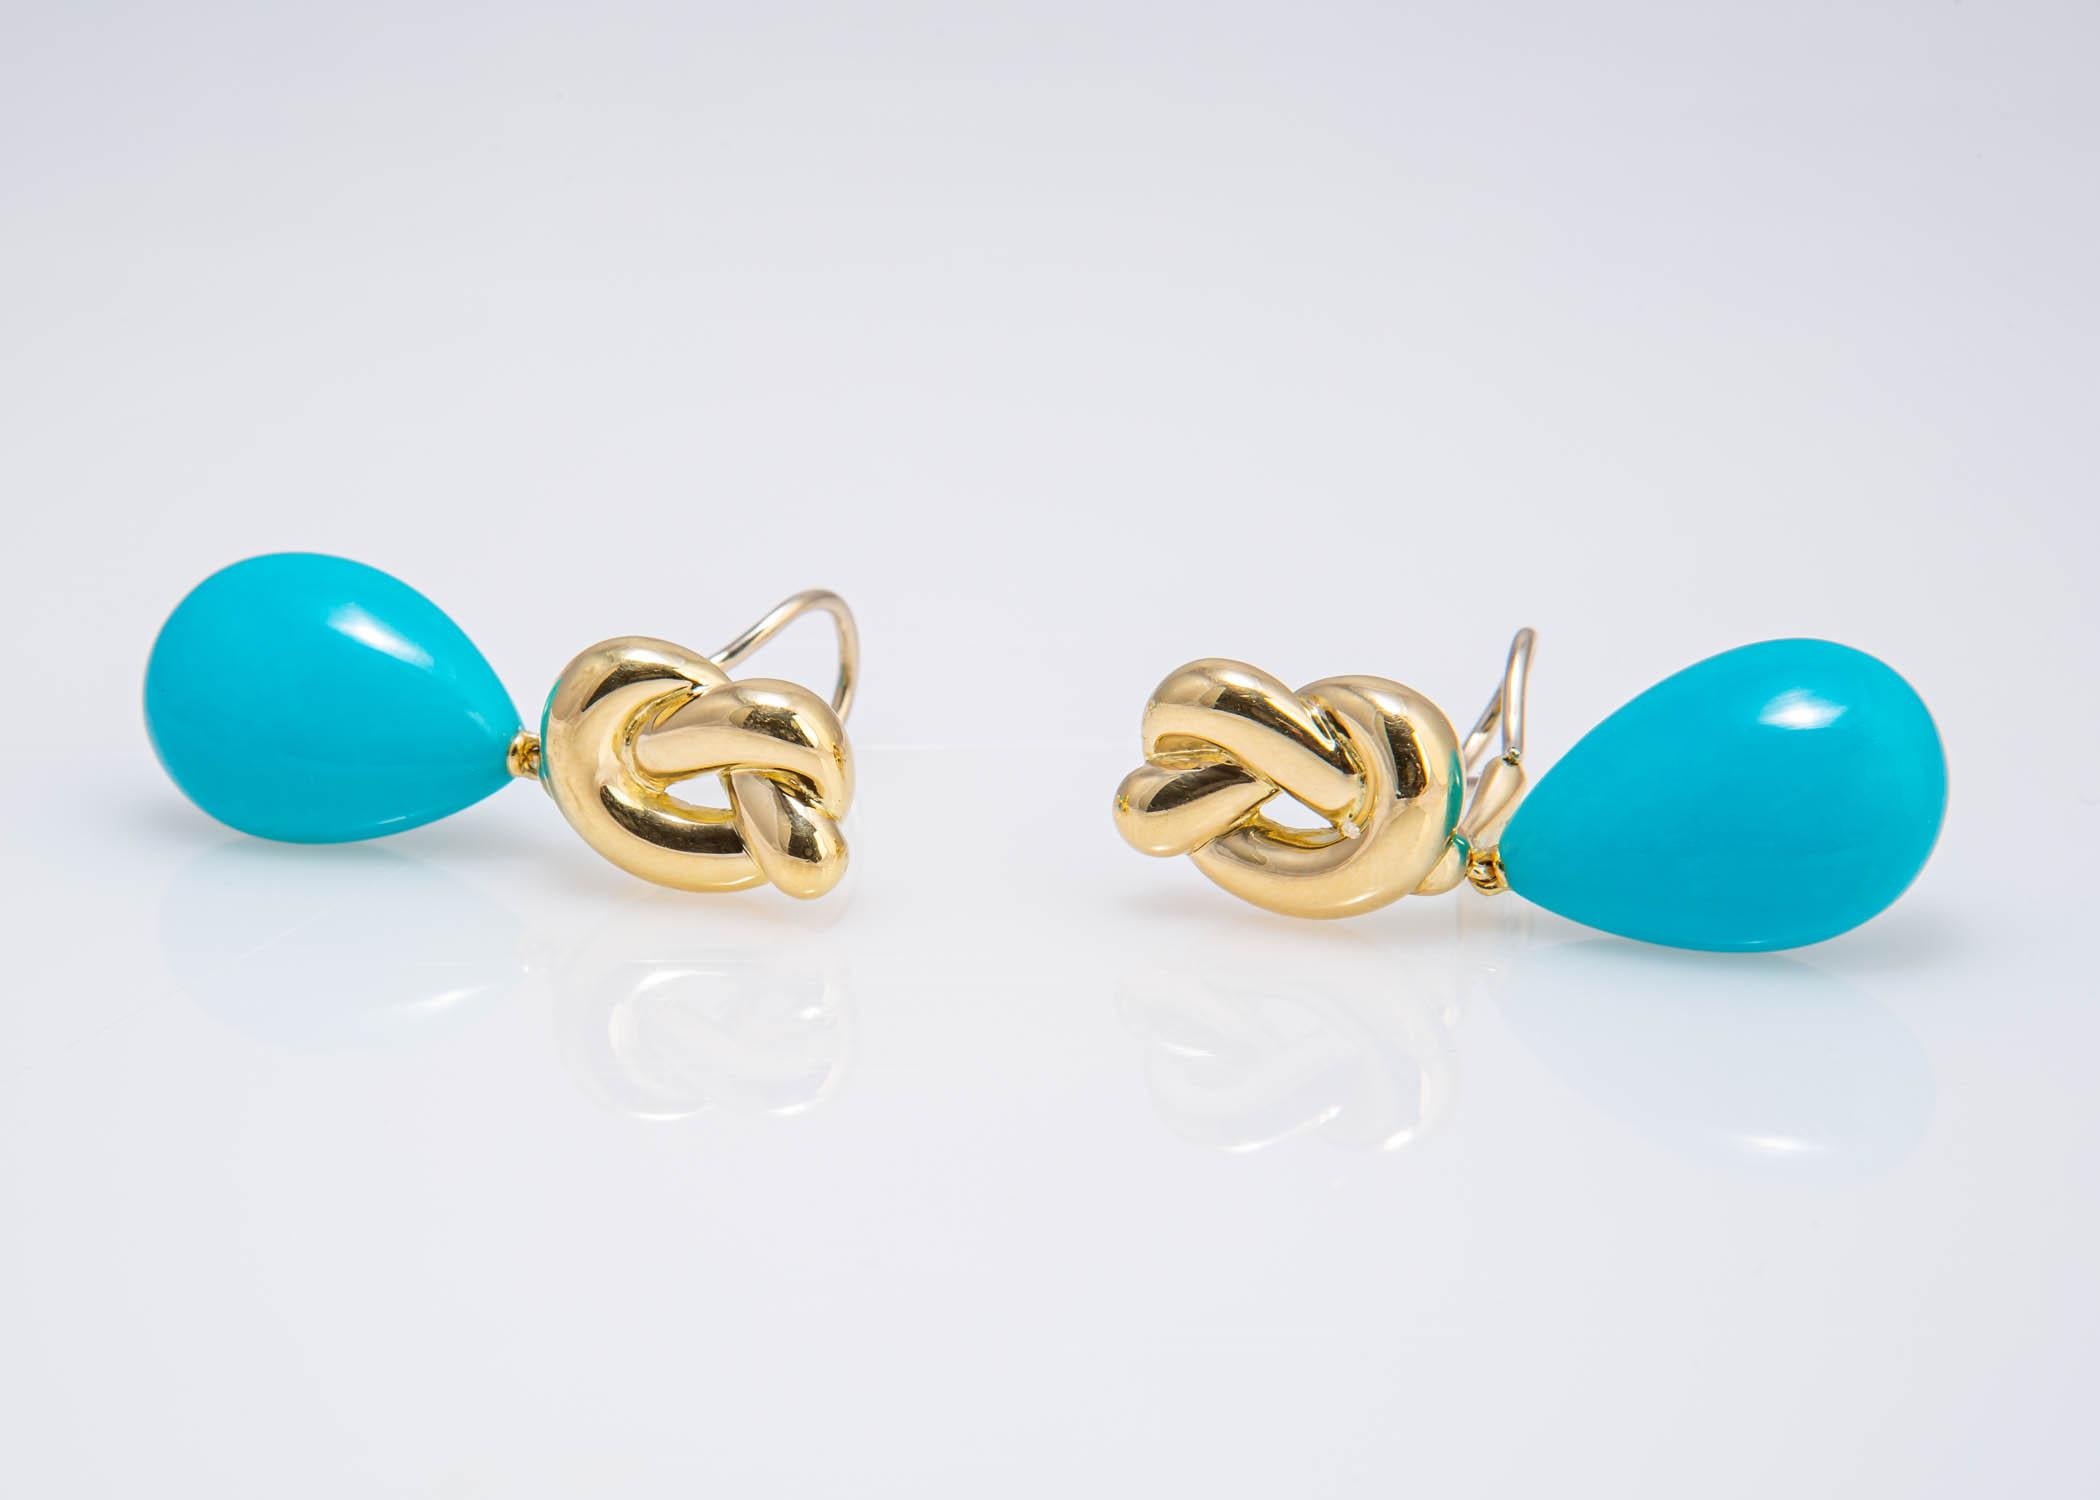 Contemporary Angela Cummings Gold and Turquoise Drop Earrings